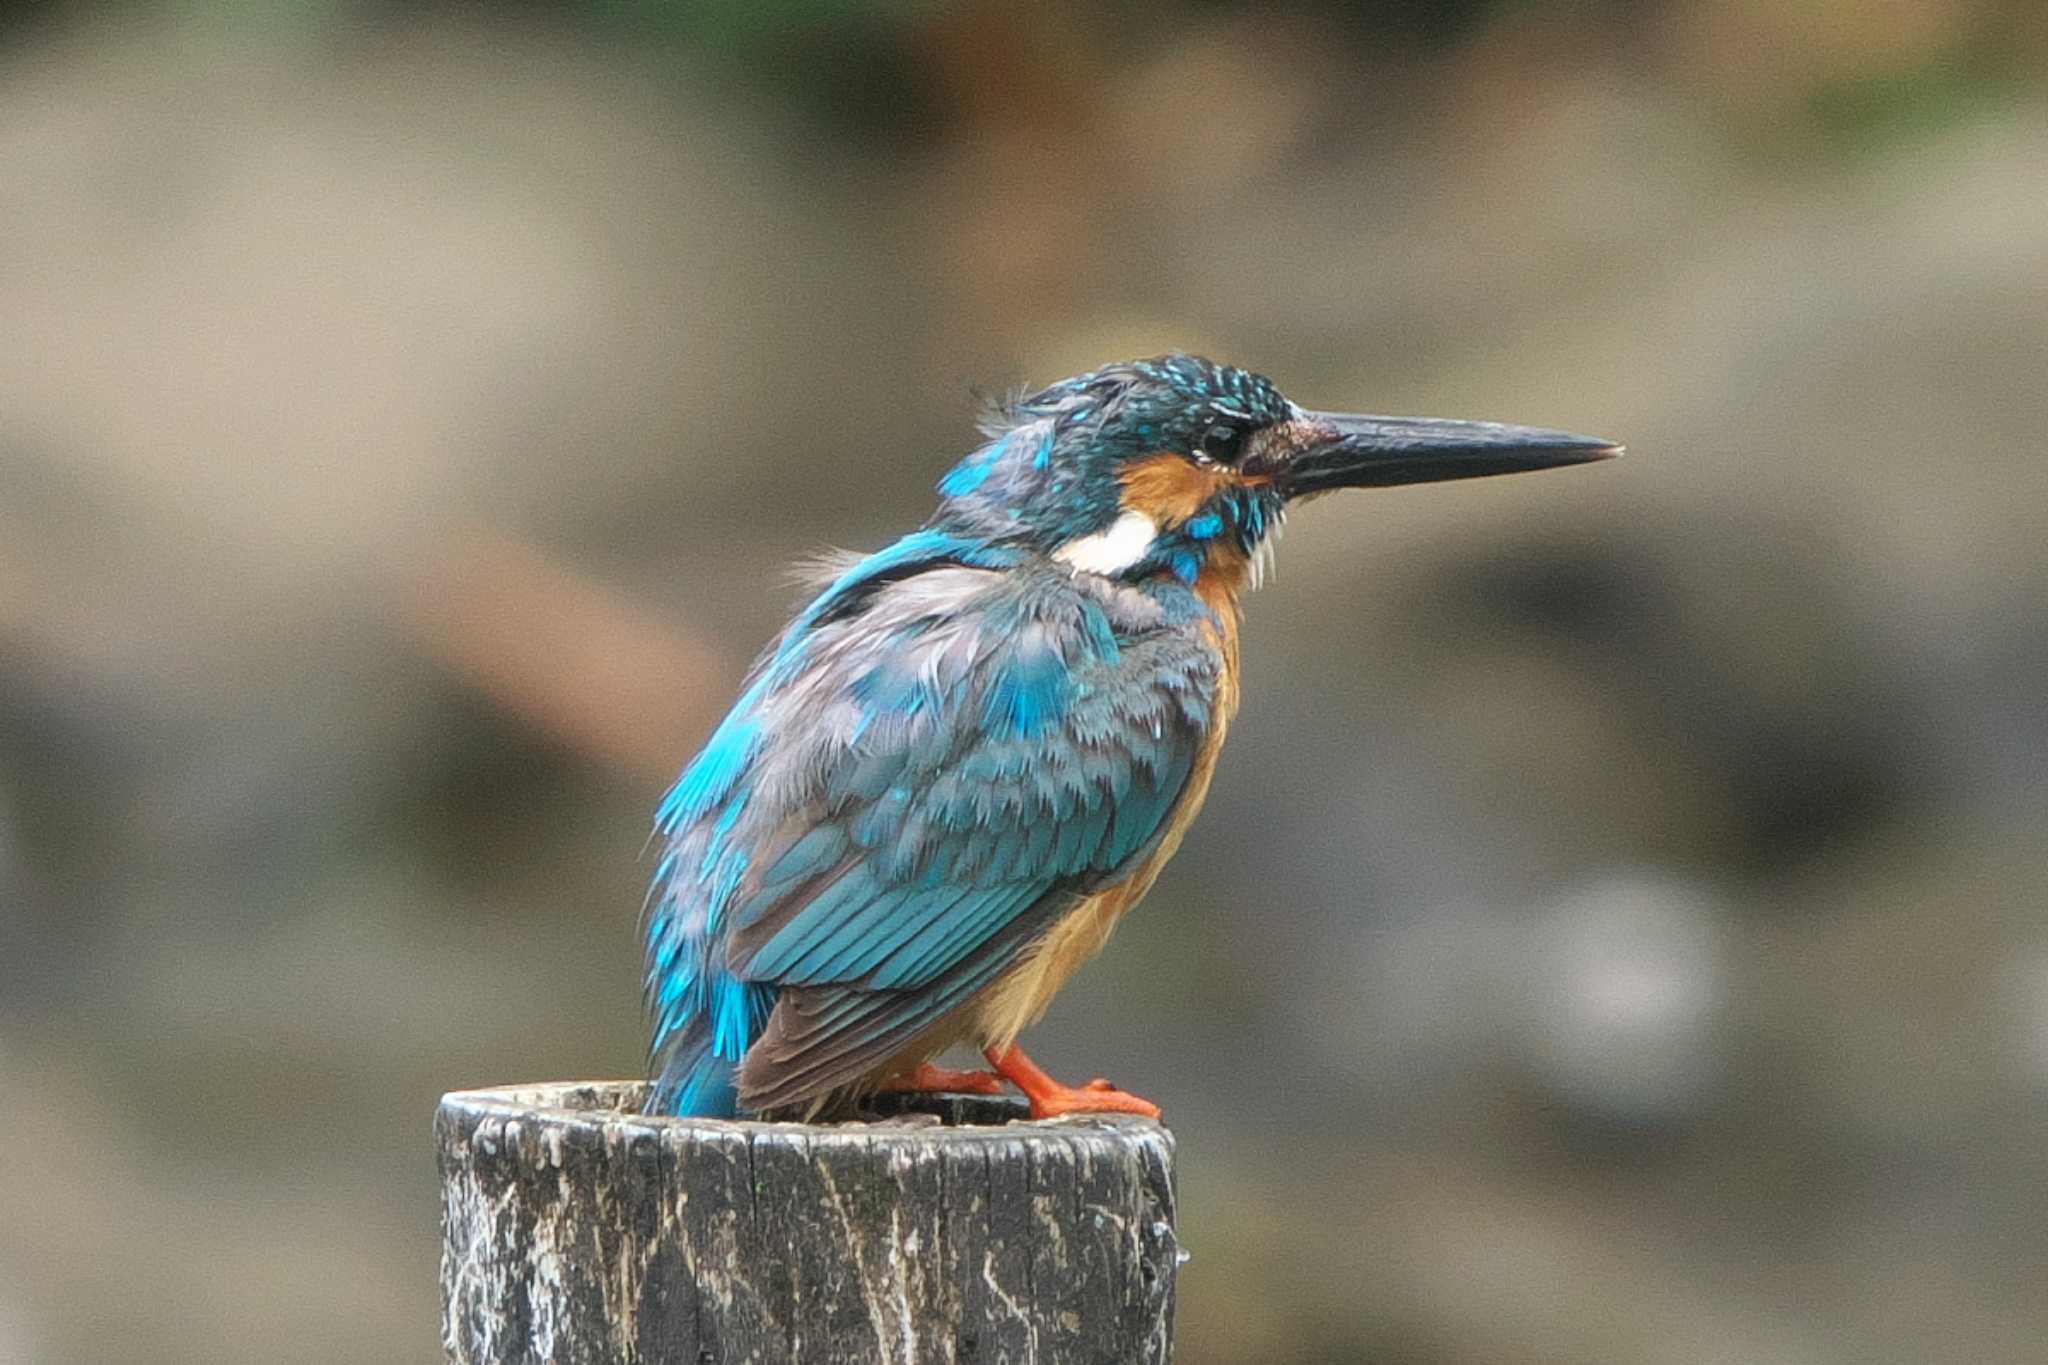 Photo of Common Kingfisher at Kodomo Shizen Park by Y. Watanabe